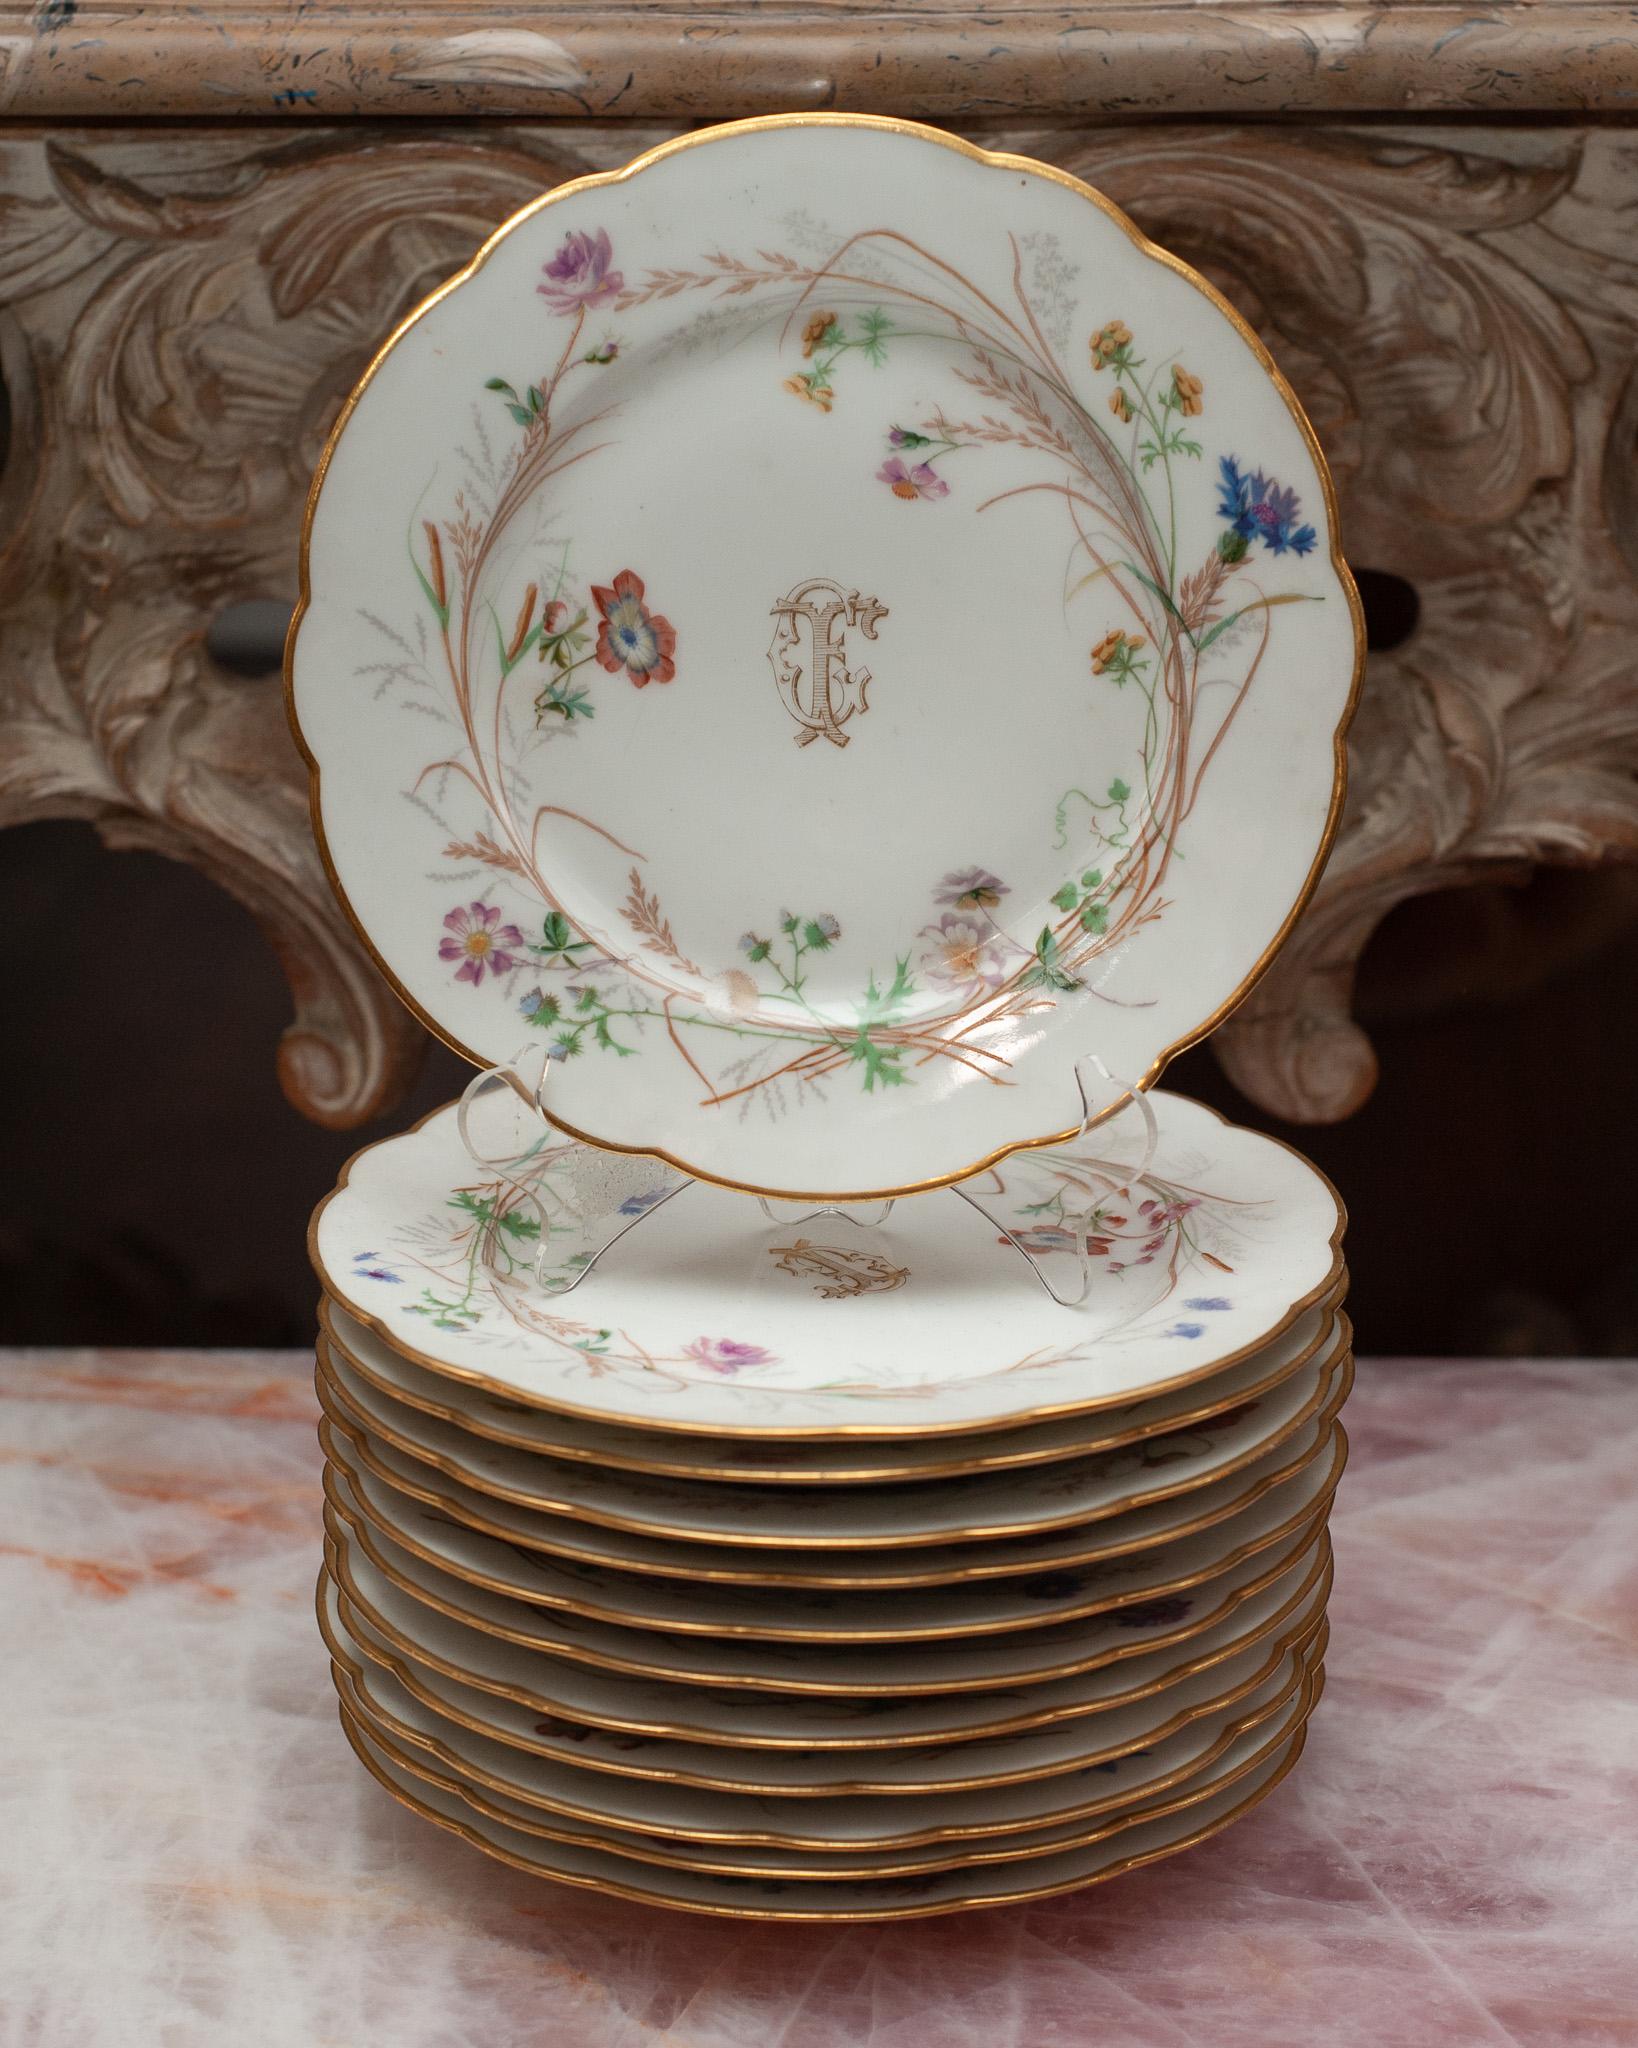 An antique set of 12 dessert plates by H. Beziat, France. Beautifully gilded gold scalloped edges, with floral design and CF initials.